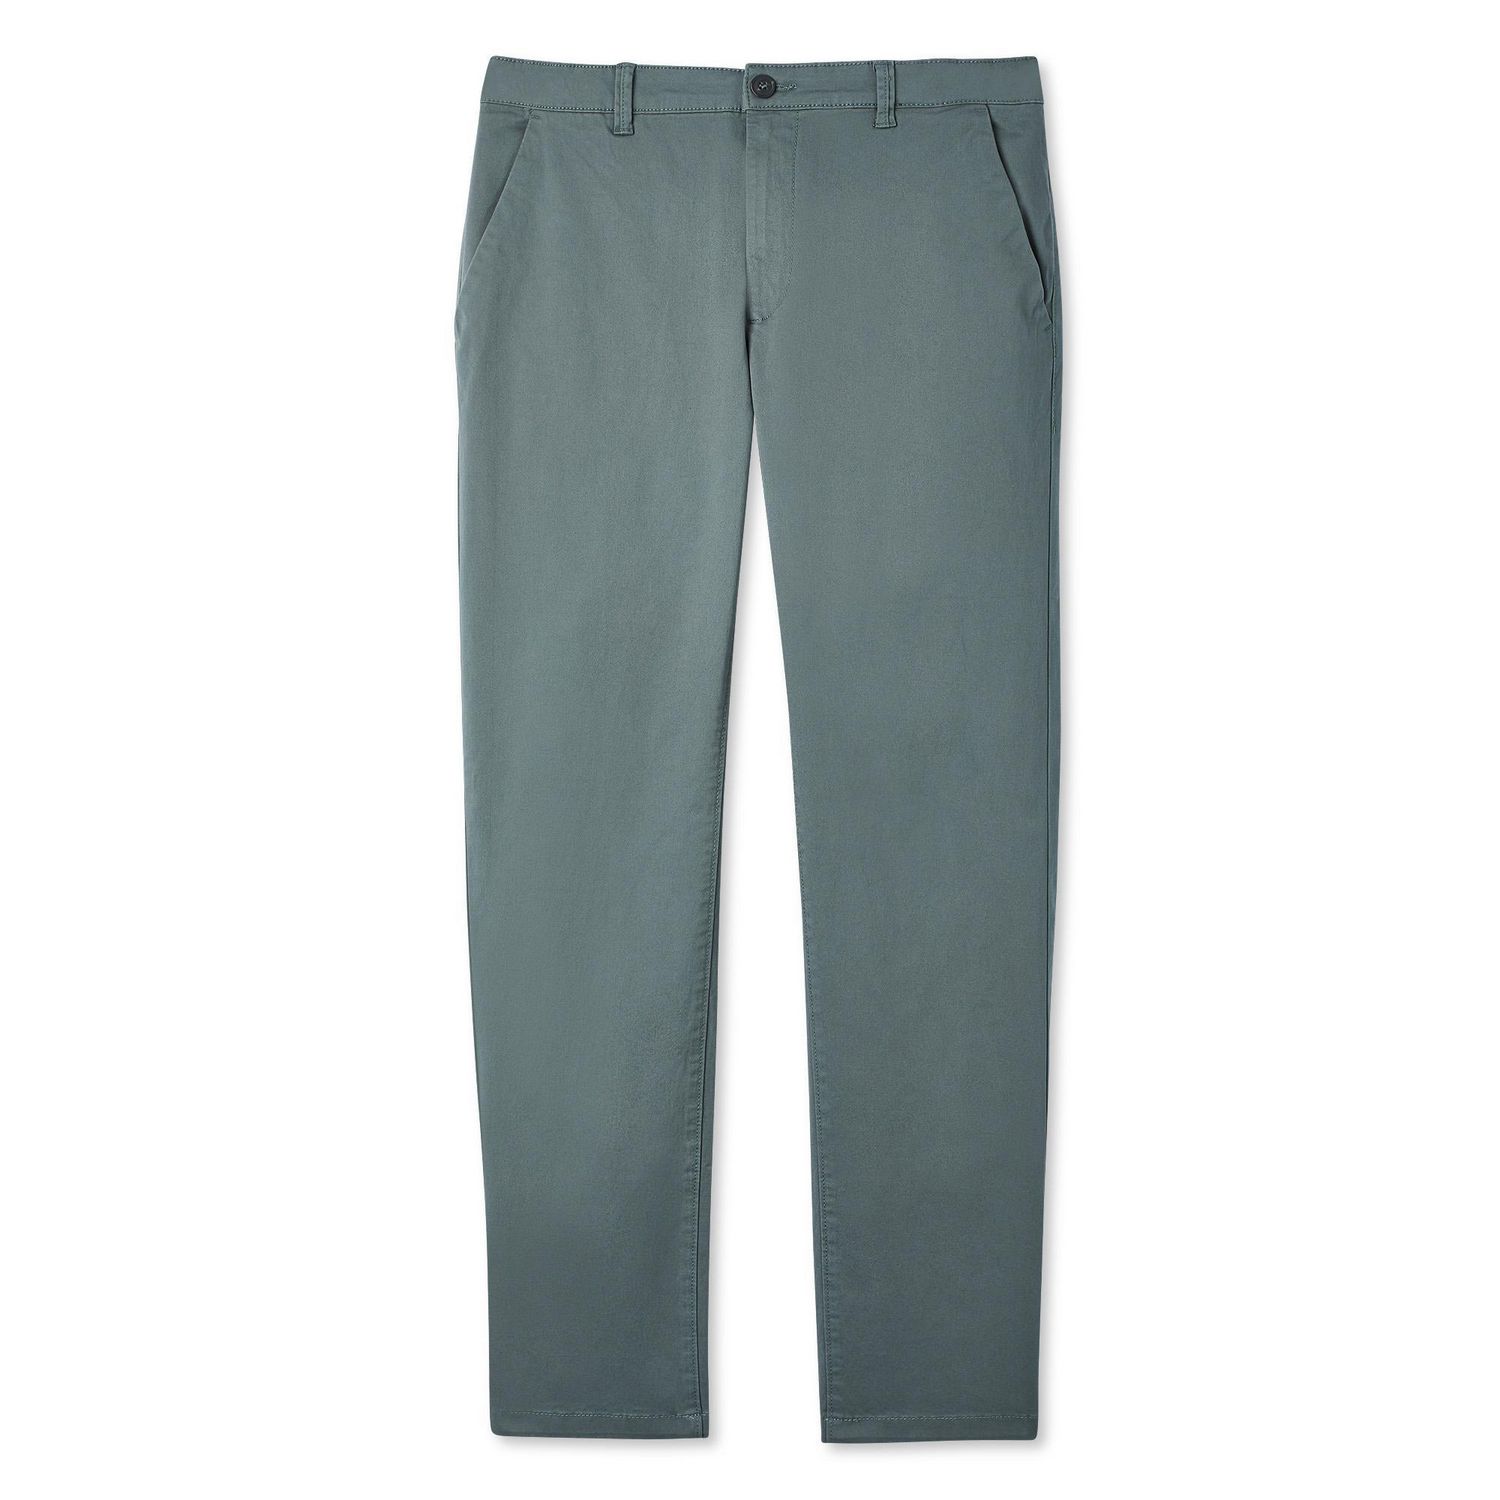 George Men's Straight Fit Chino Pant | Walmart Canada